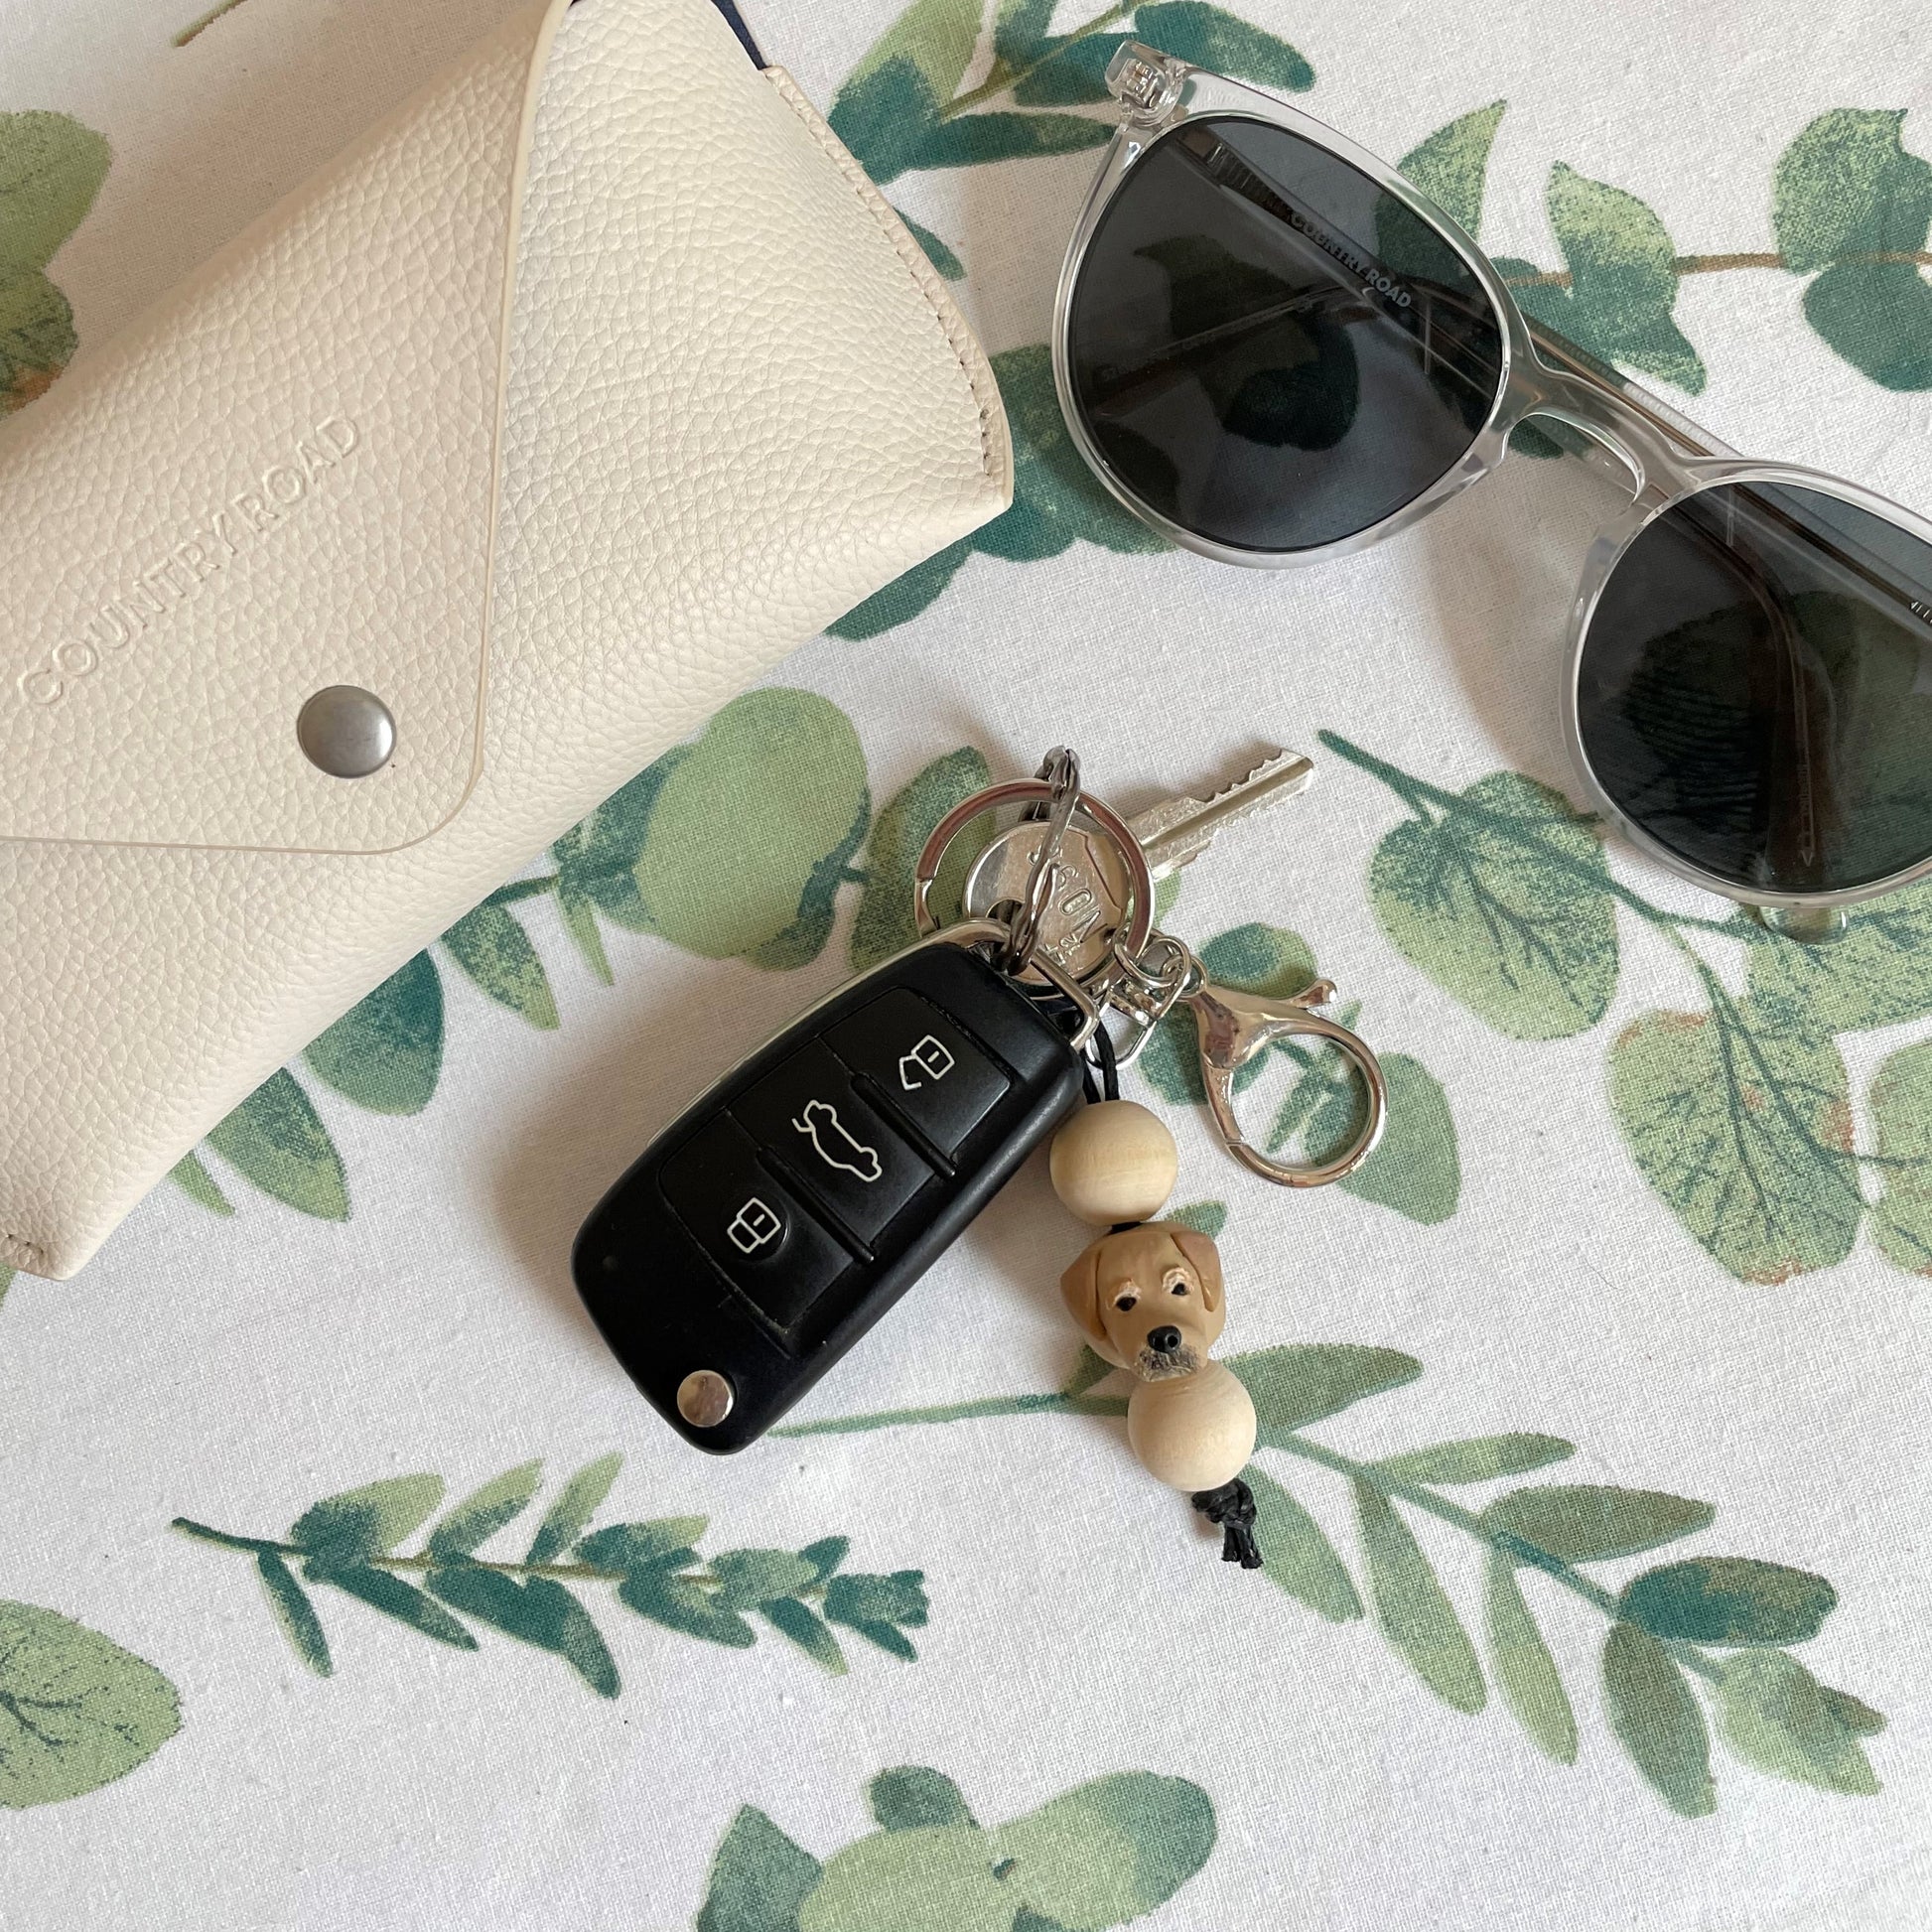 Handmade timber and polymer clay golden retriever dog keychain on white floral tablecloth beside sunglasses